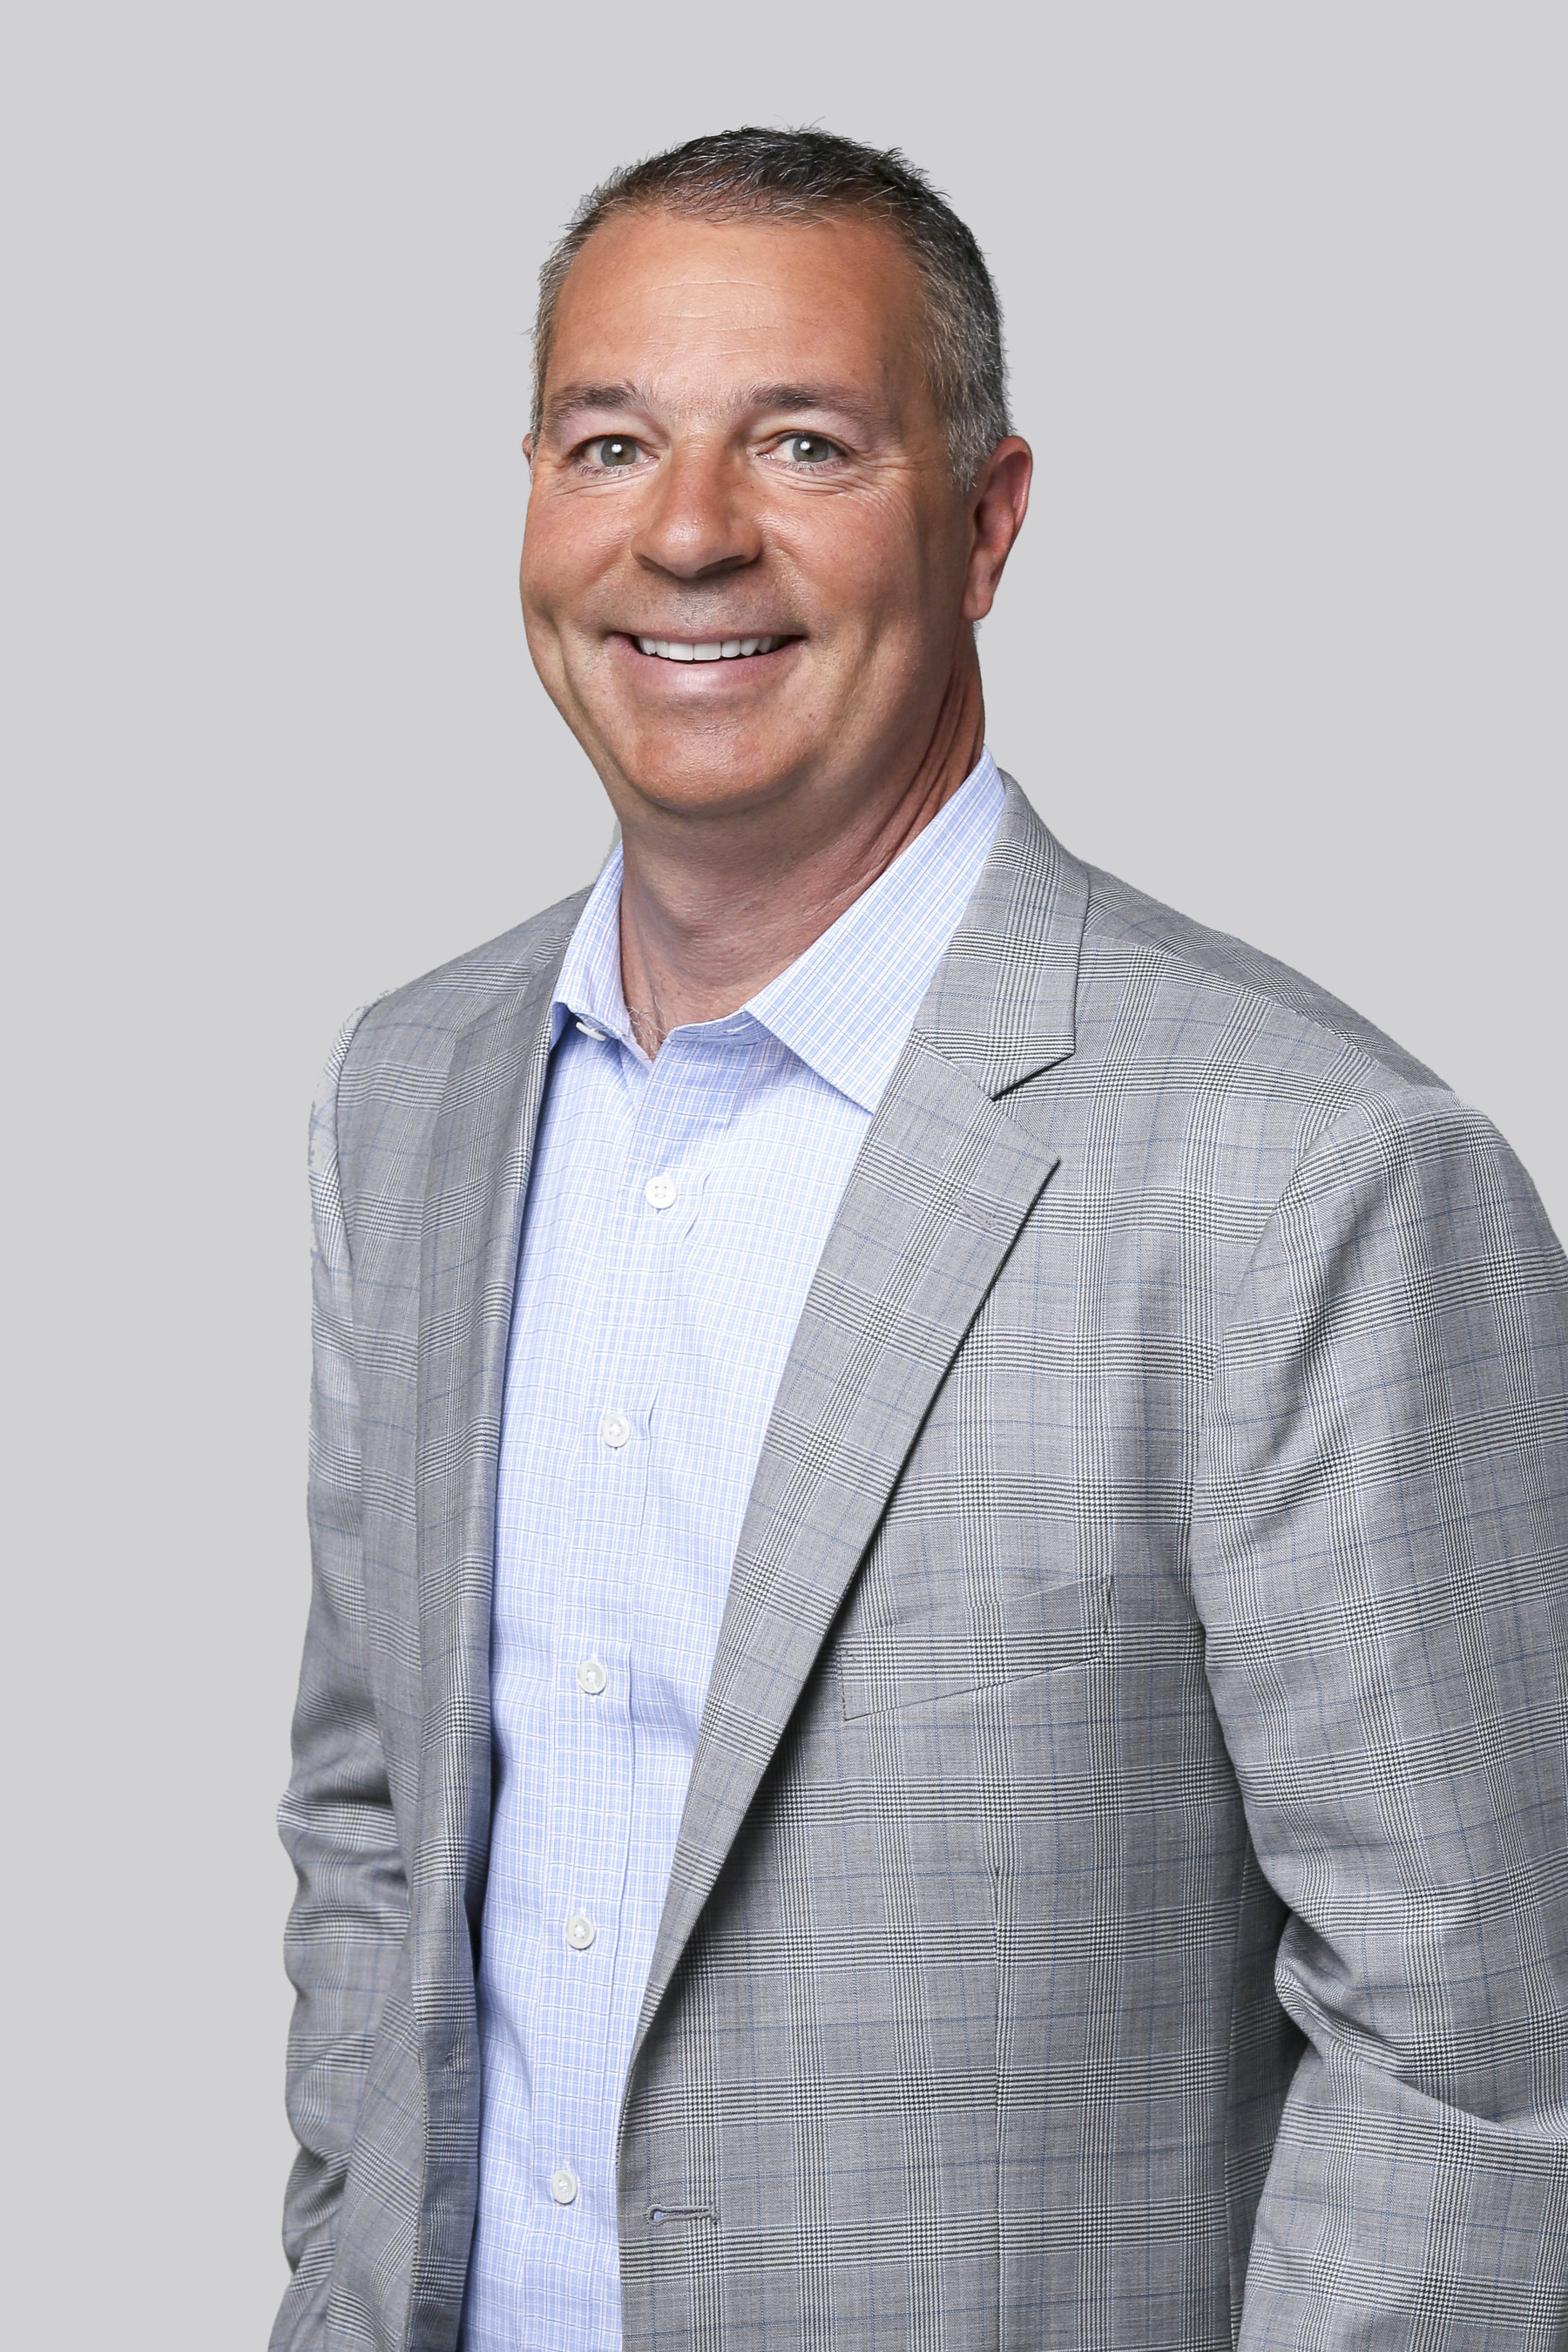 Deckers Brands appoints David Lafitte to Chief Operating Officer